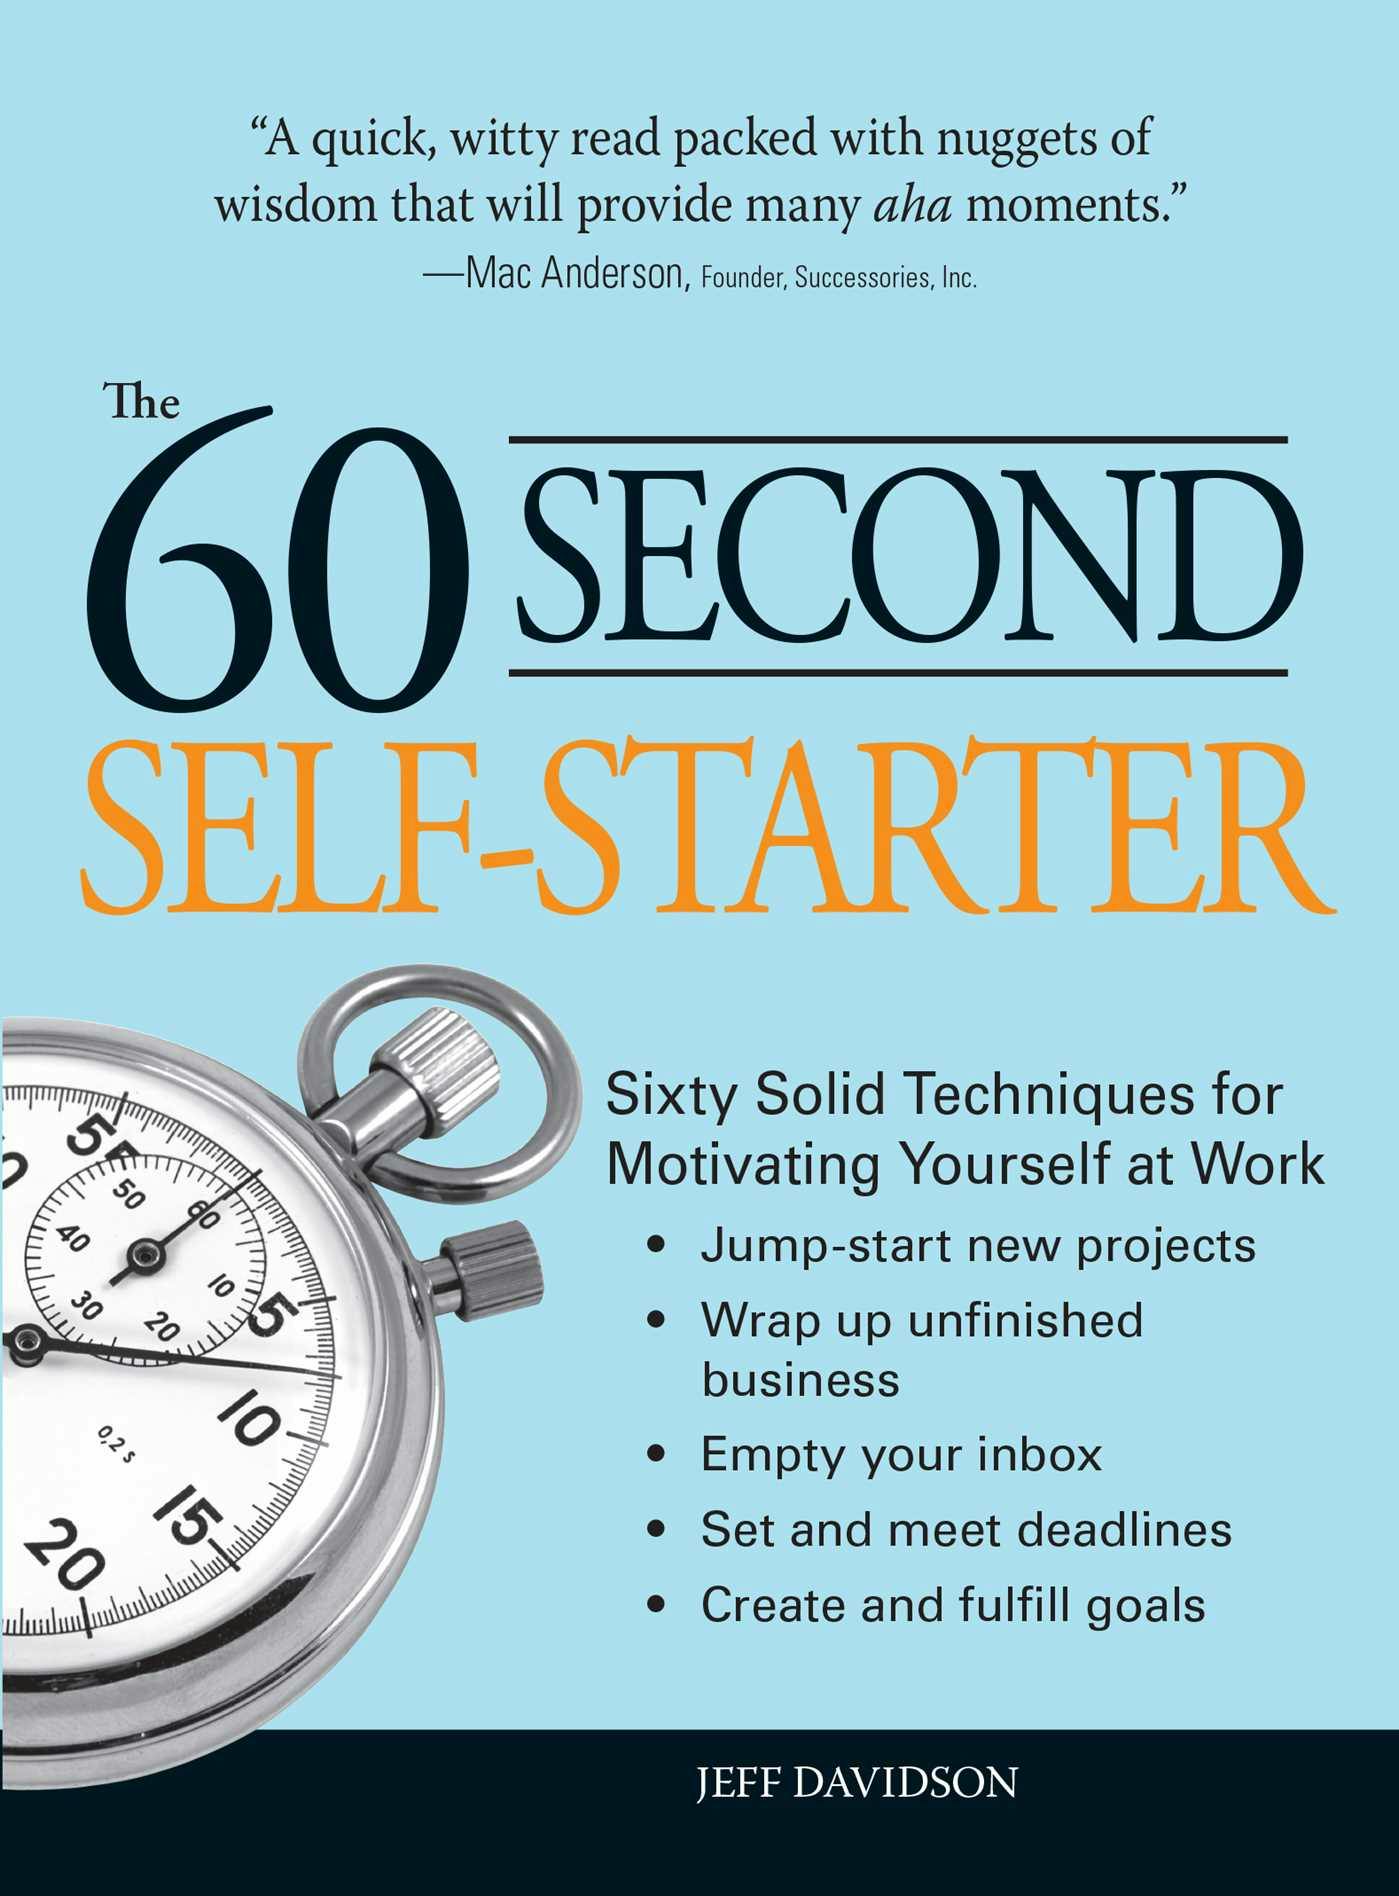 60 Second Self-Starter: Sixty Solid Techniques to get motivated, get organized, and get going in the workplace. - undefined